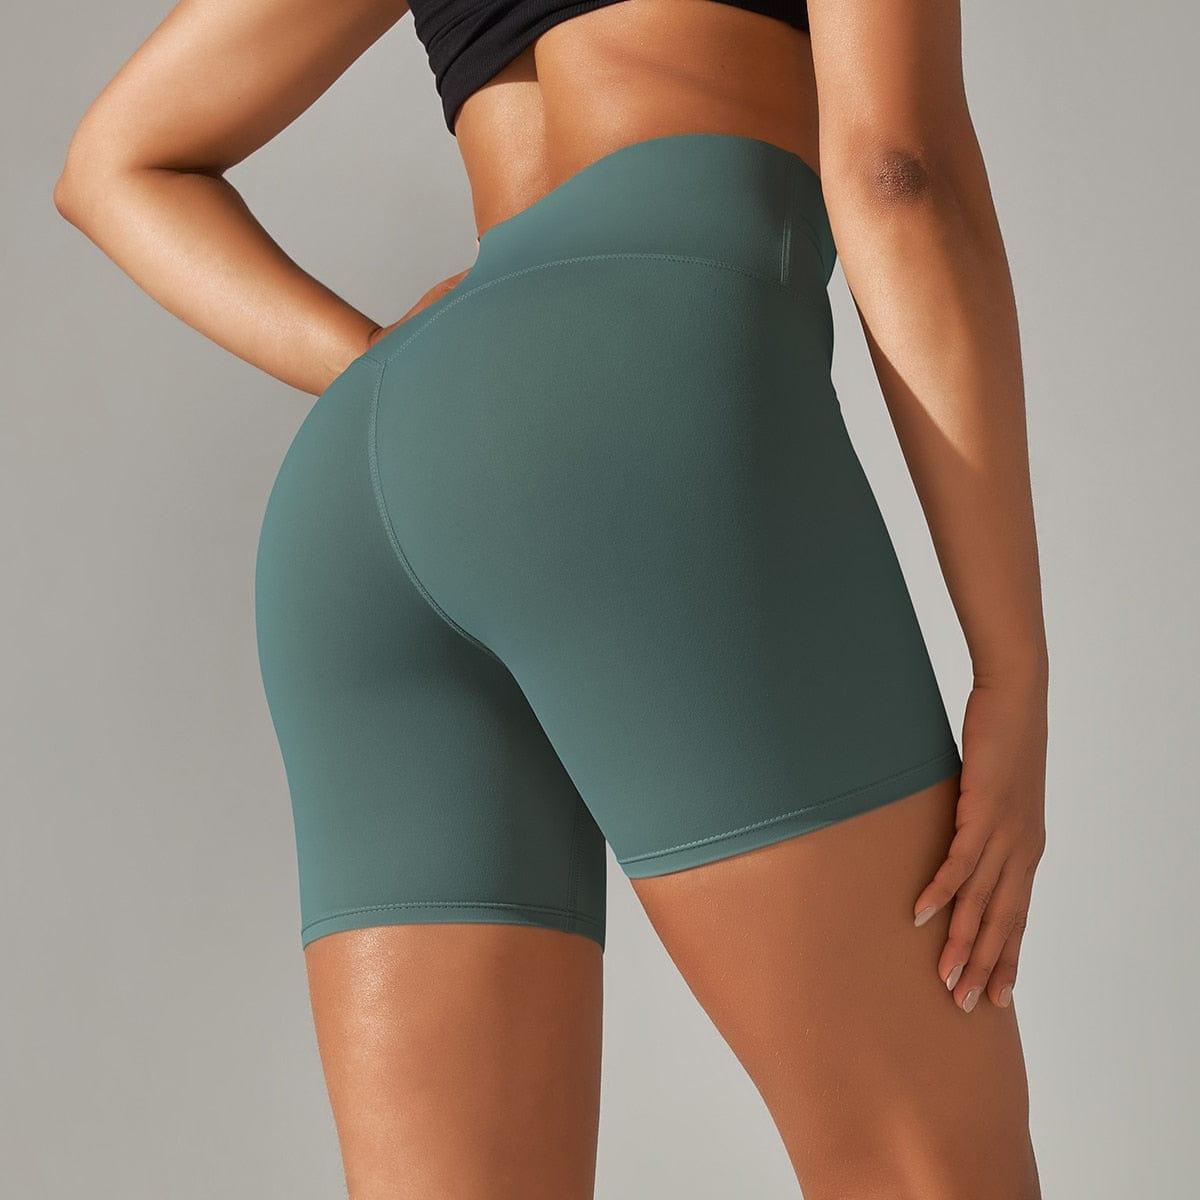 Shop 0 Yoga Shorts Women Fitness Shorts Running Cycling Shorts Breathable Sports Leggings High Waist Summer Workout Gym Shorts Mademoiselle Home Decor